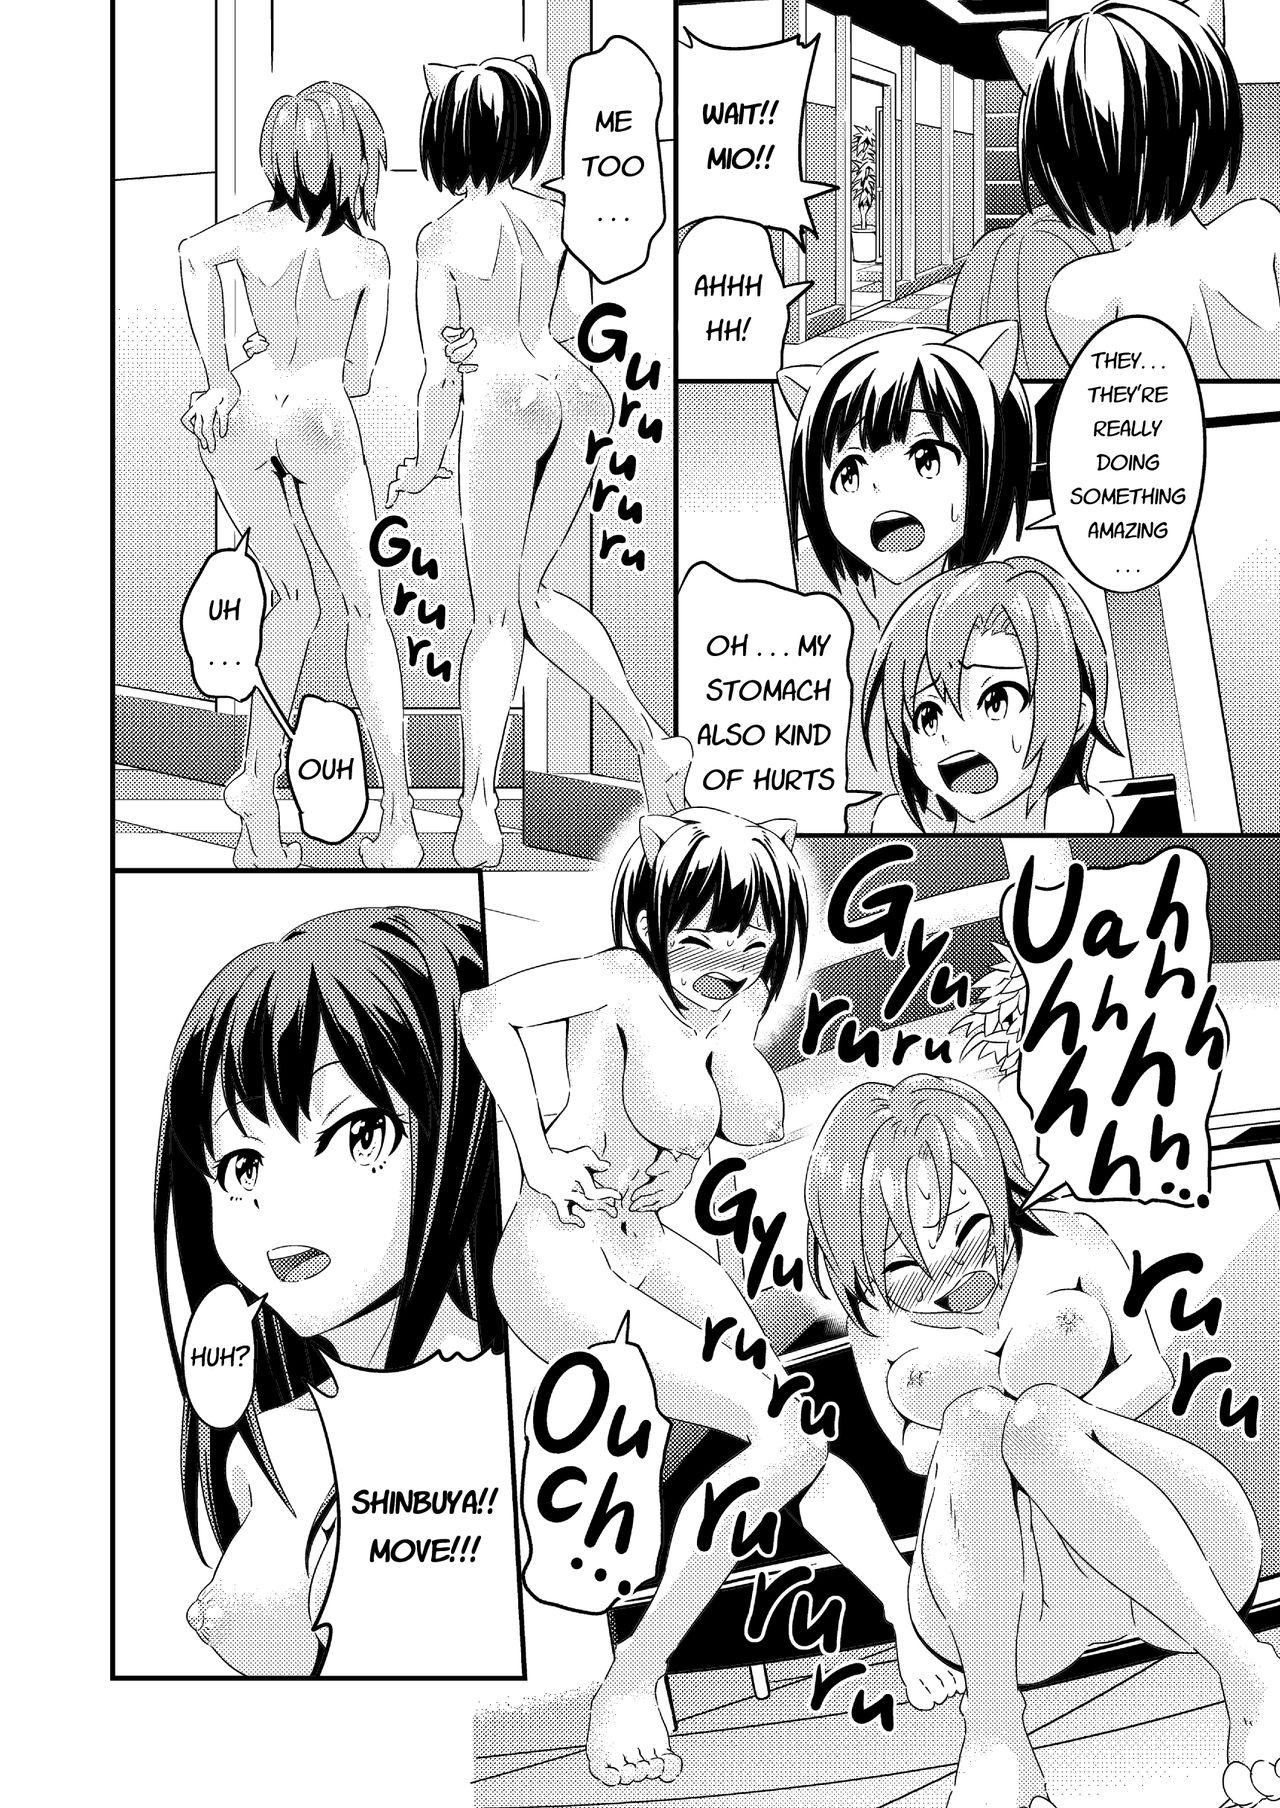 Colombiana ICE WORK - The idolmaster Busty - Page 9